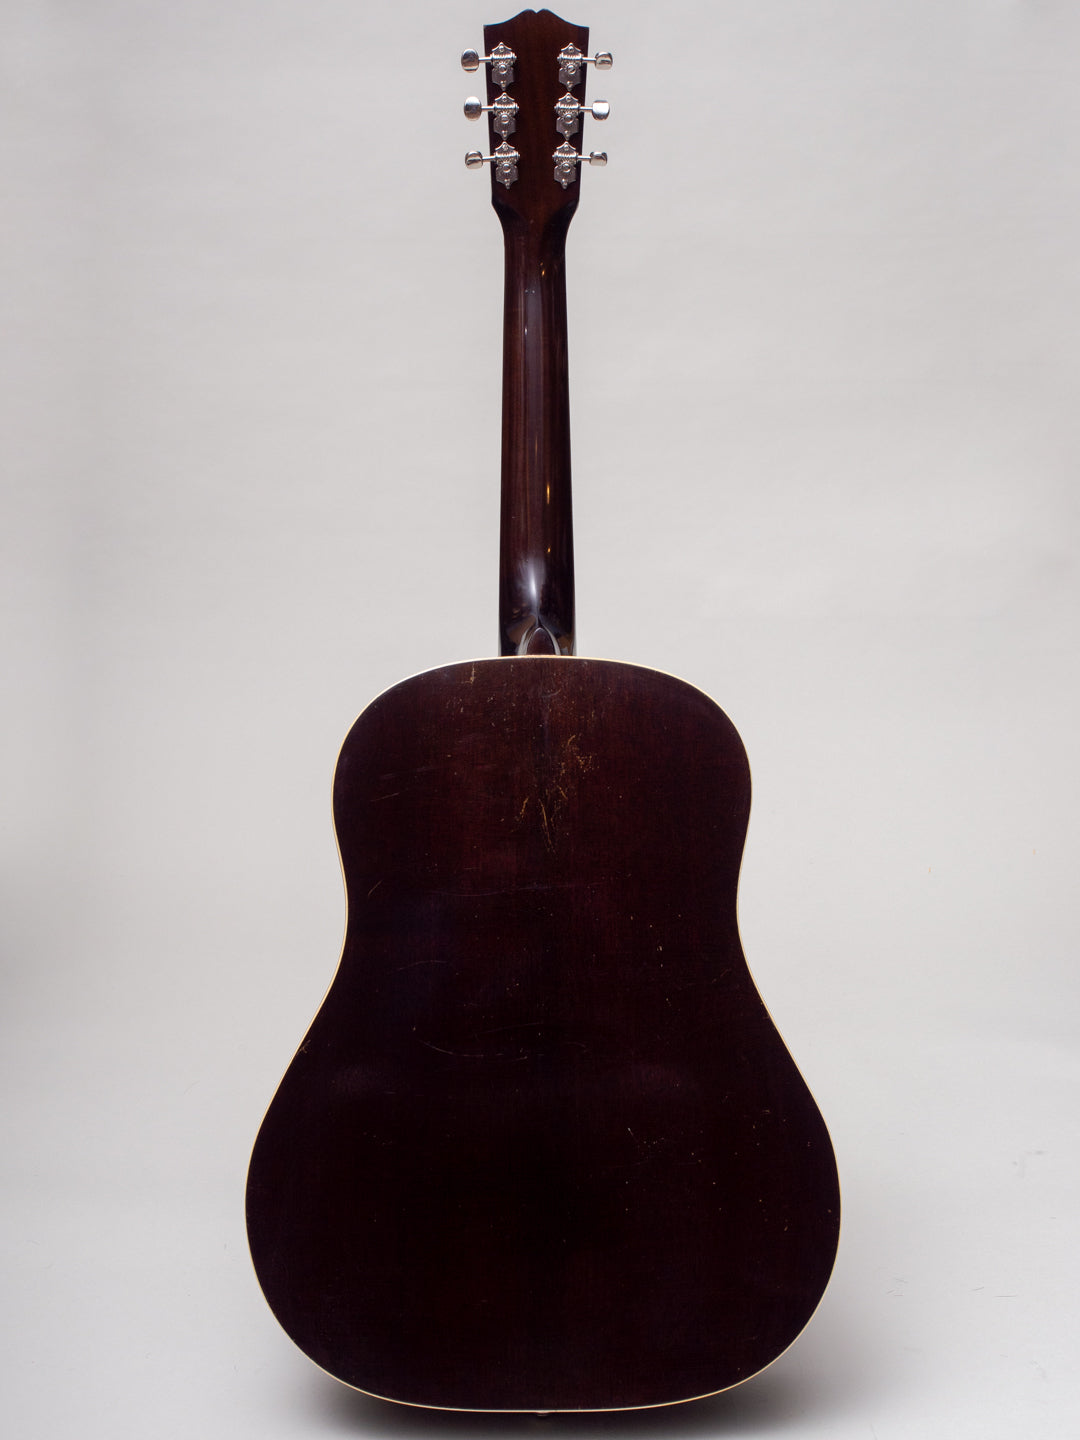 1935 Gibson Roy Smeck Stage De Luxe